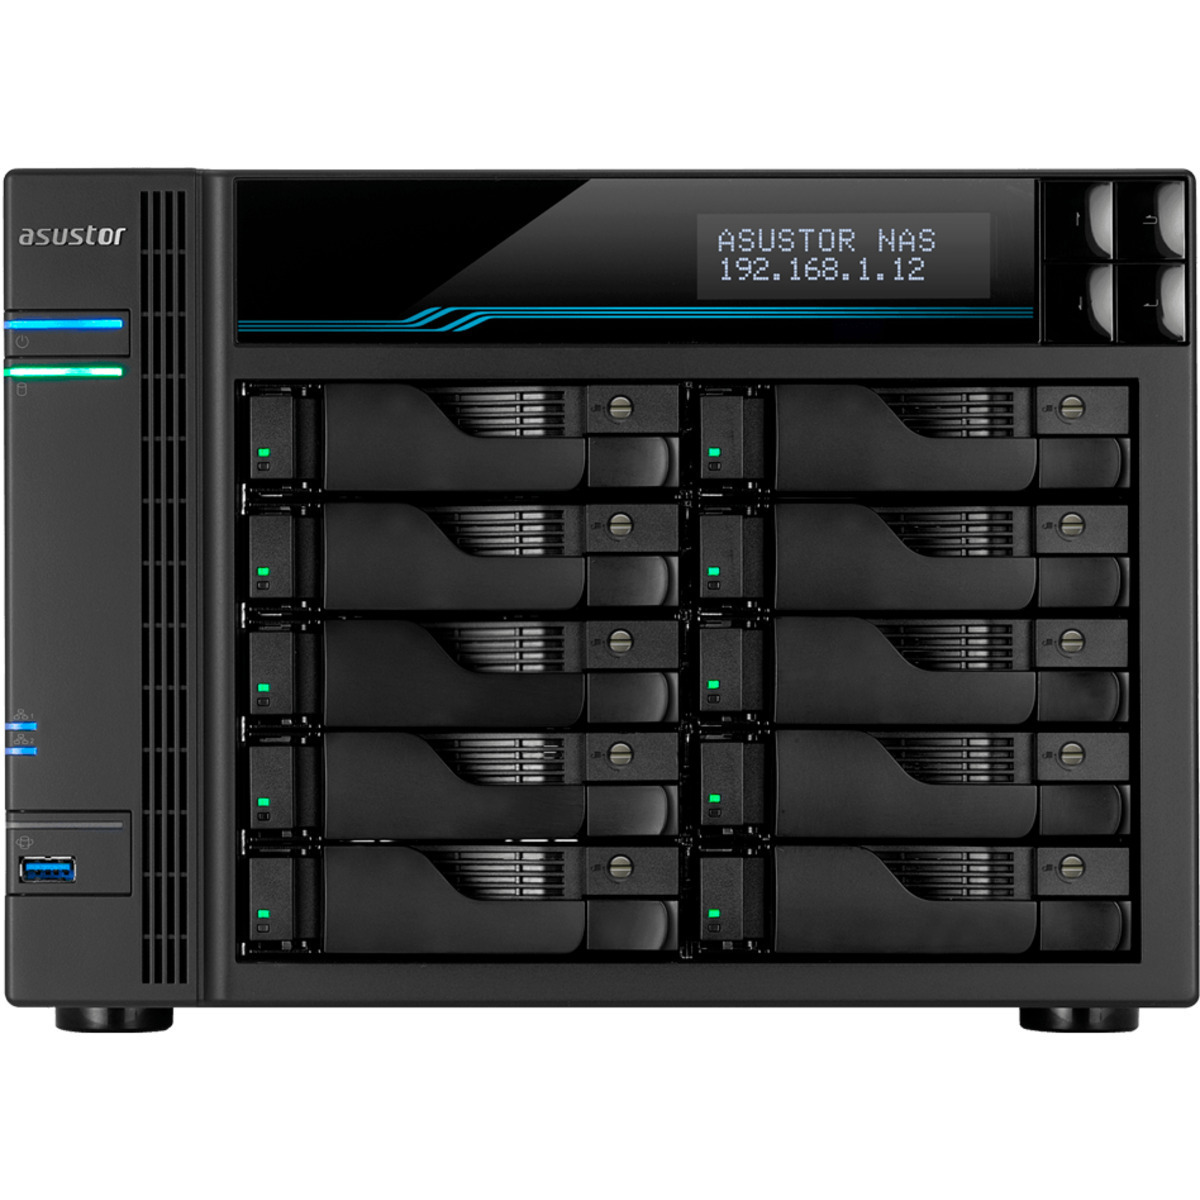 ASUSTOR AS6510T Lockerstor 10 120tb 10-Bay Desktop Multimedia / Power User / Business NAS - Network Attached Storage Device 10x12tb Seagate EXOS X18 ST12000NM000J 3.5 7200rpm SATA 6Gb/s HDD ENTERPRISE Class Drives Installed - Burn-In Tested - FREE RAM UPGRADE AS6510T Lockerstor 10